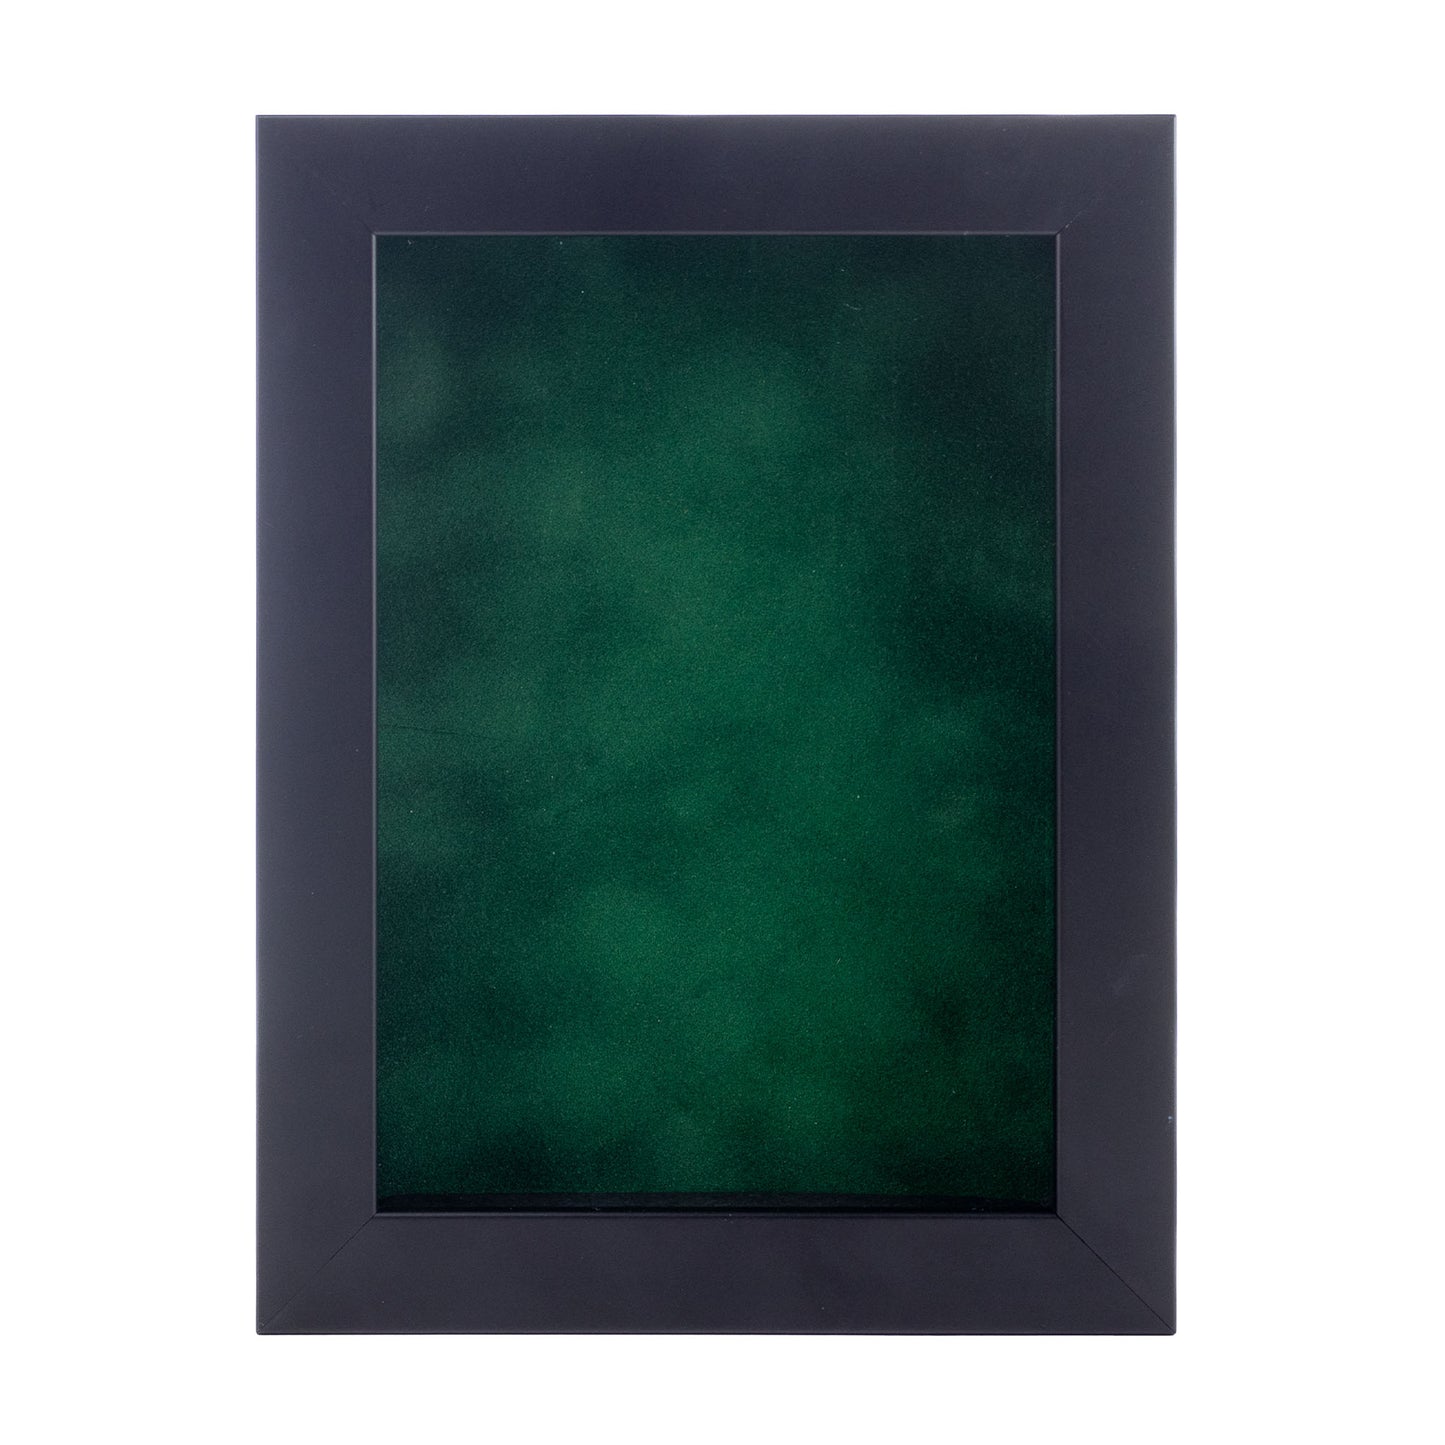 Black Shadow Box Frame With Forest Green Acid-Free Suede Backing